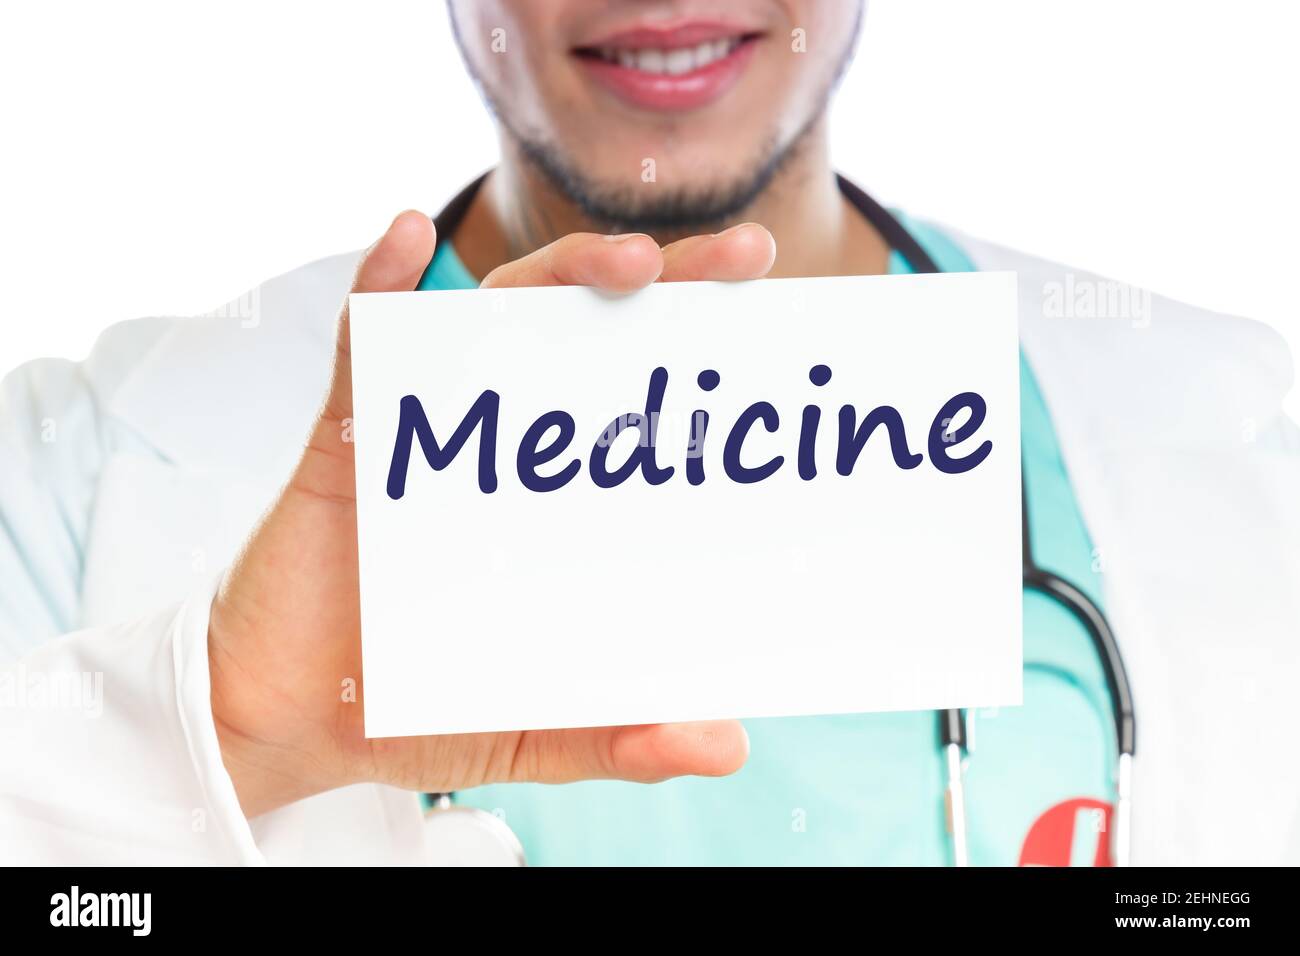 Medicine diagnosis disease ill illness healthy health doctor with sign Stock Photo